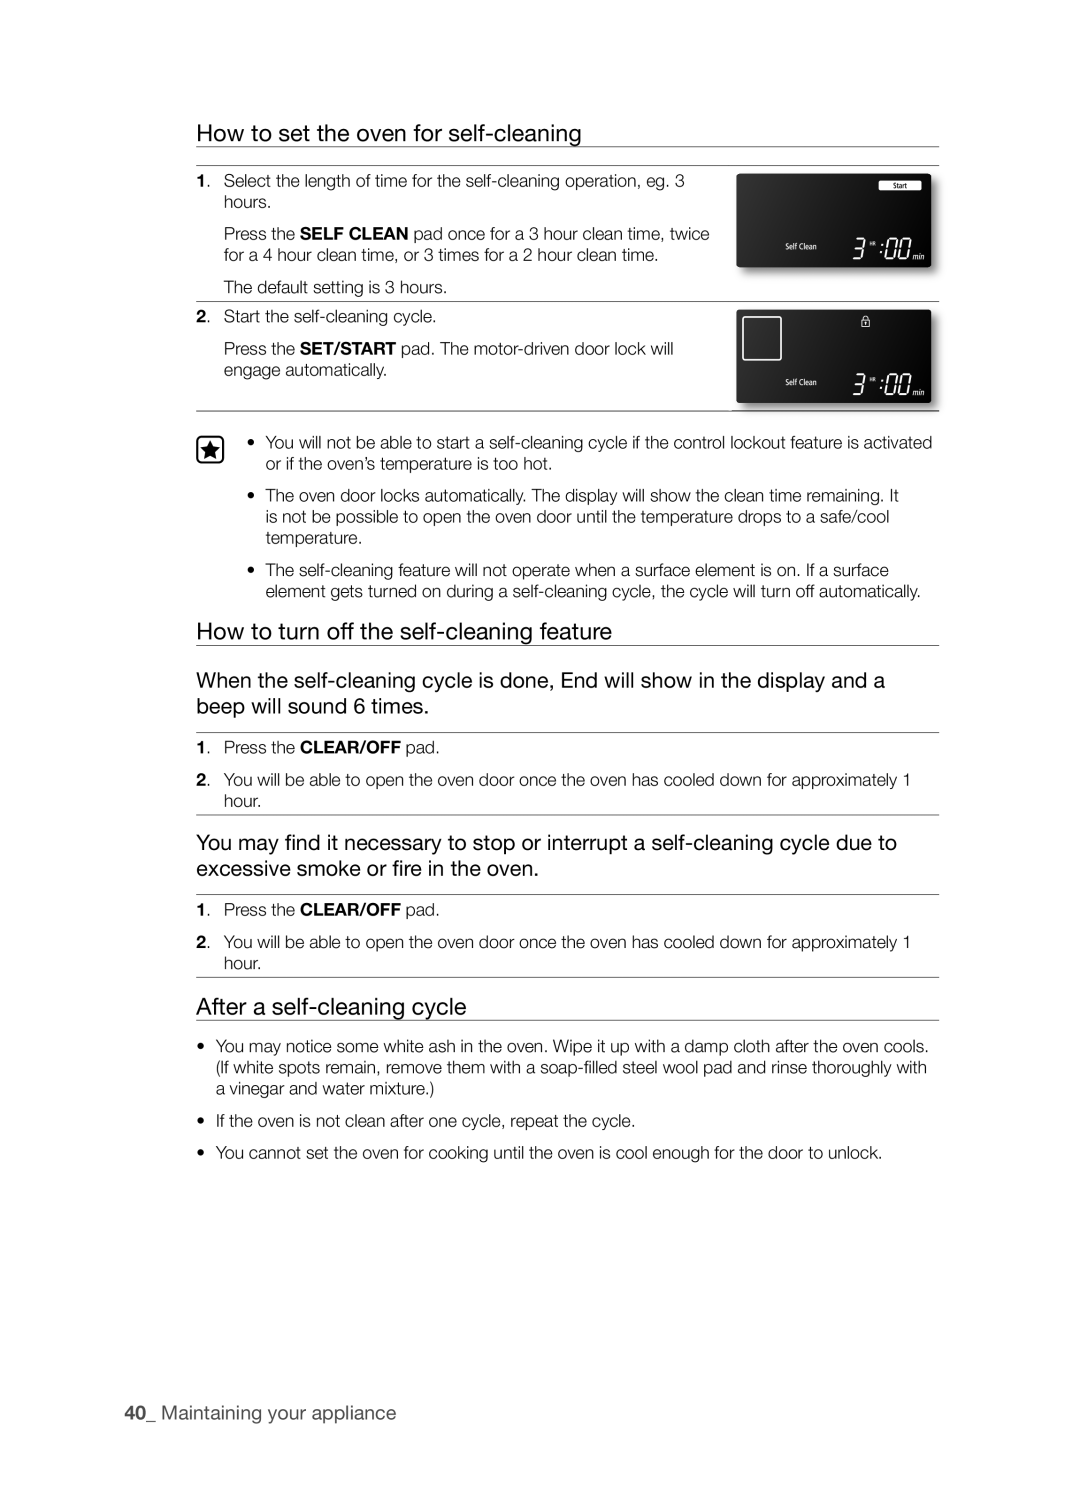 Samsung FTQ386LWX user manual How to set the oven for self-cleaning, How to turn off the self-cleaningfeature 